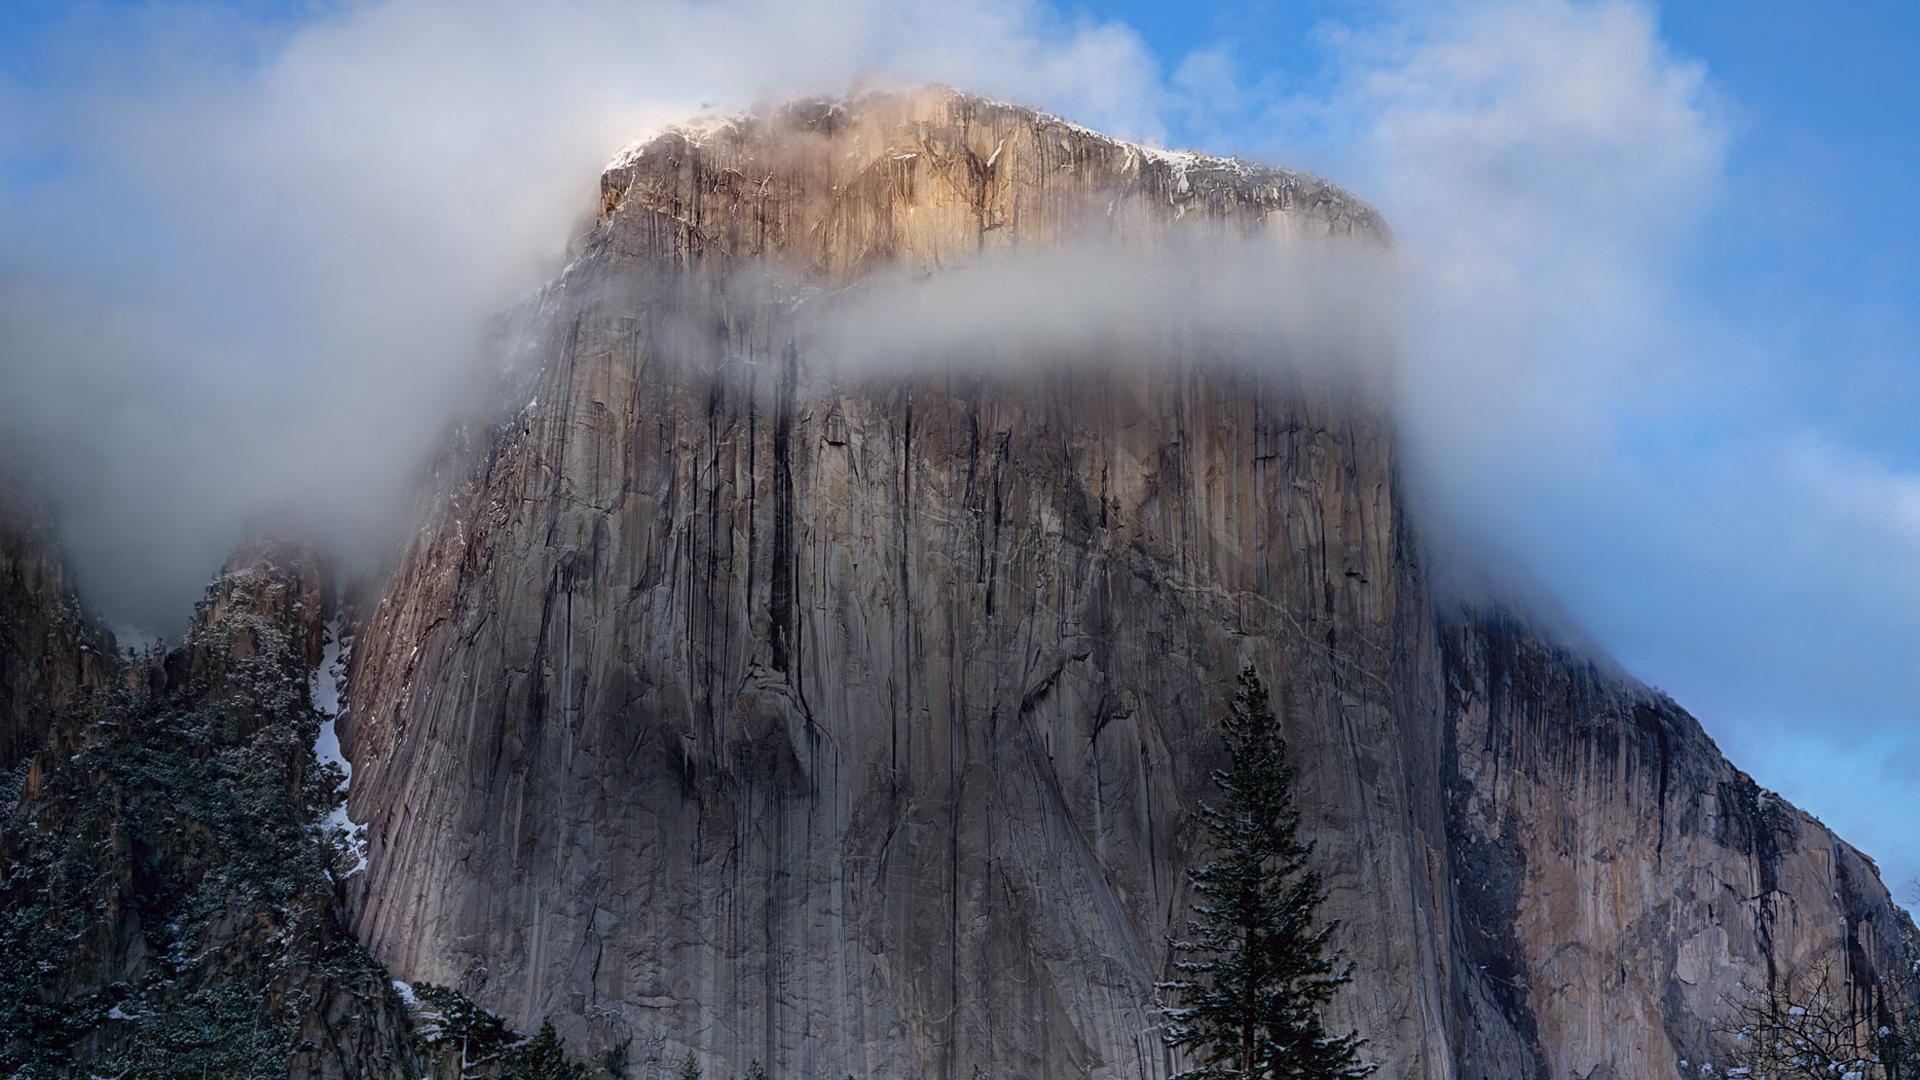 California - Yosemite portfolio contains images from Yosemite National Park  and the surrounding area